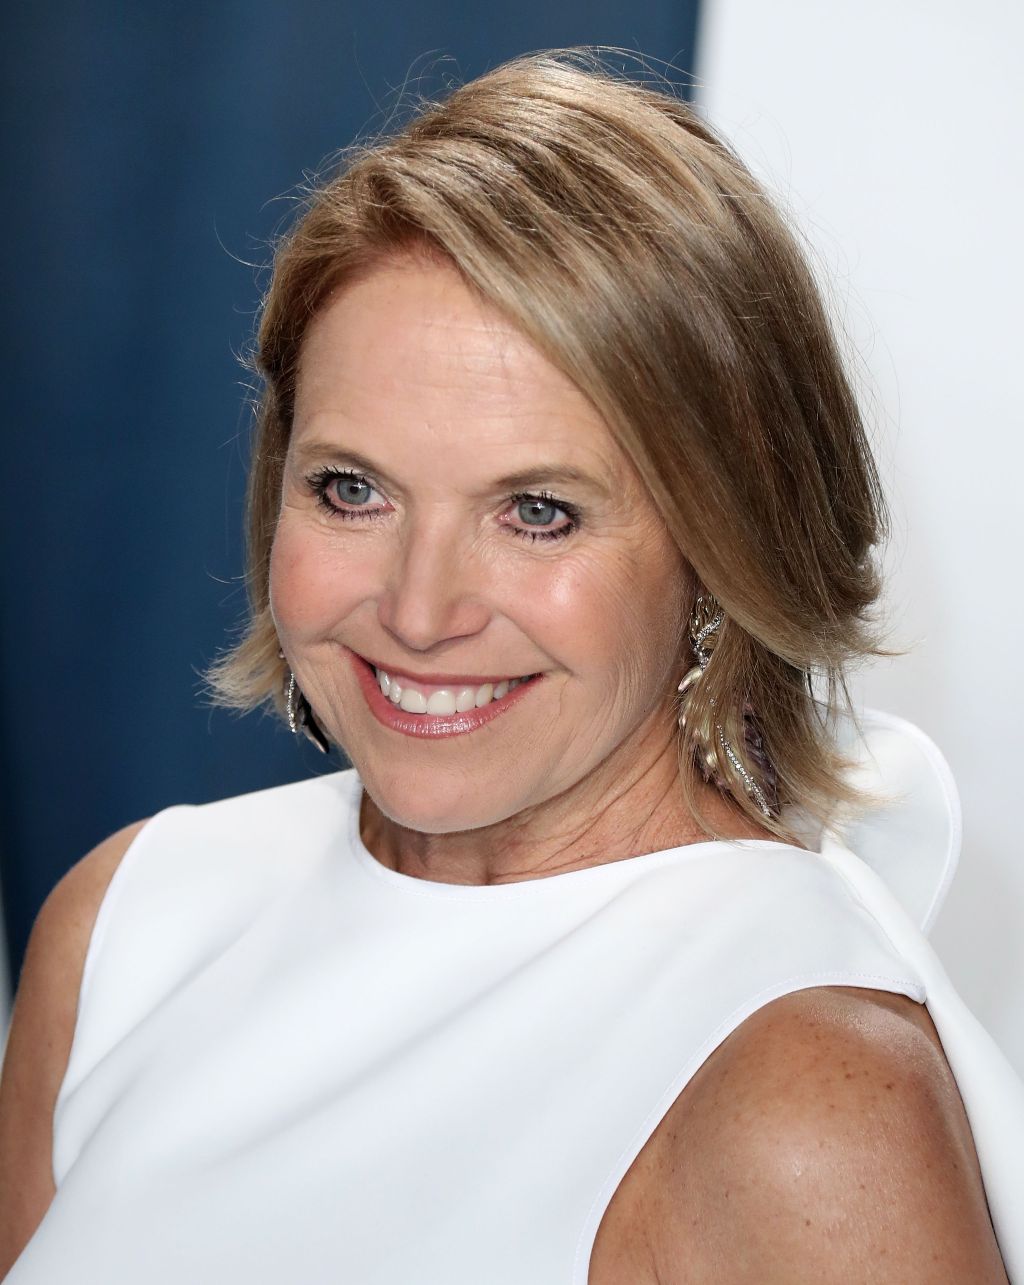 Katie Couric arrives at the 2020 Vanity Fair Oscar Party held at the Wallis Annenberg Center for the...